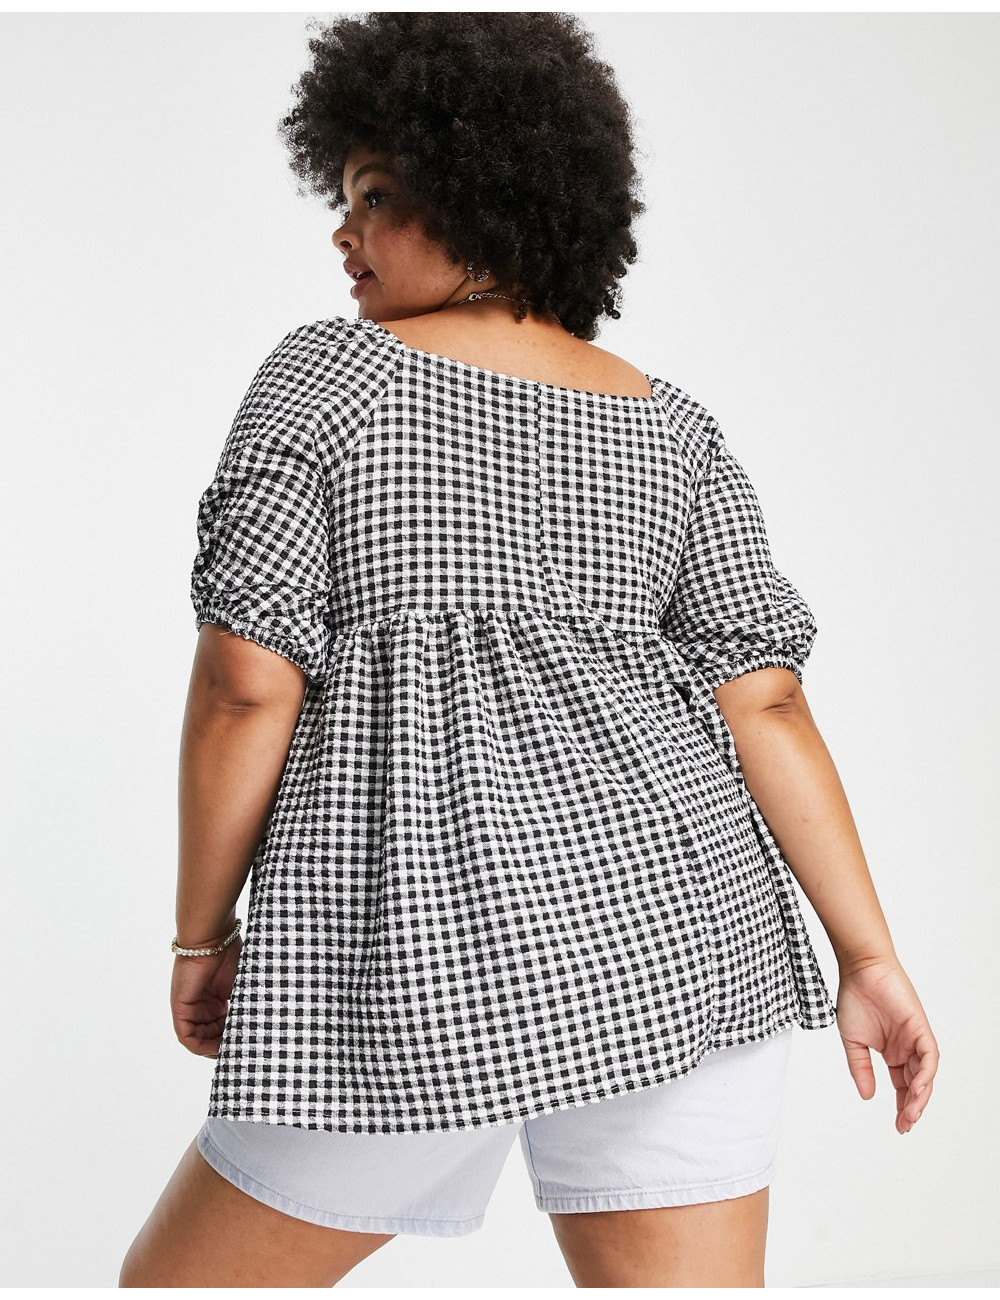 Yours square neck smock top...